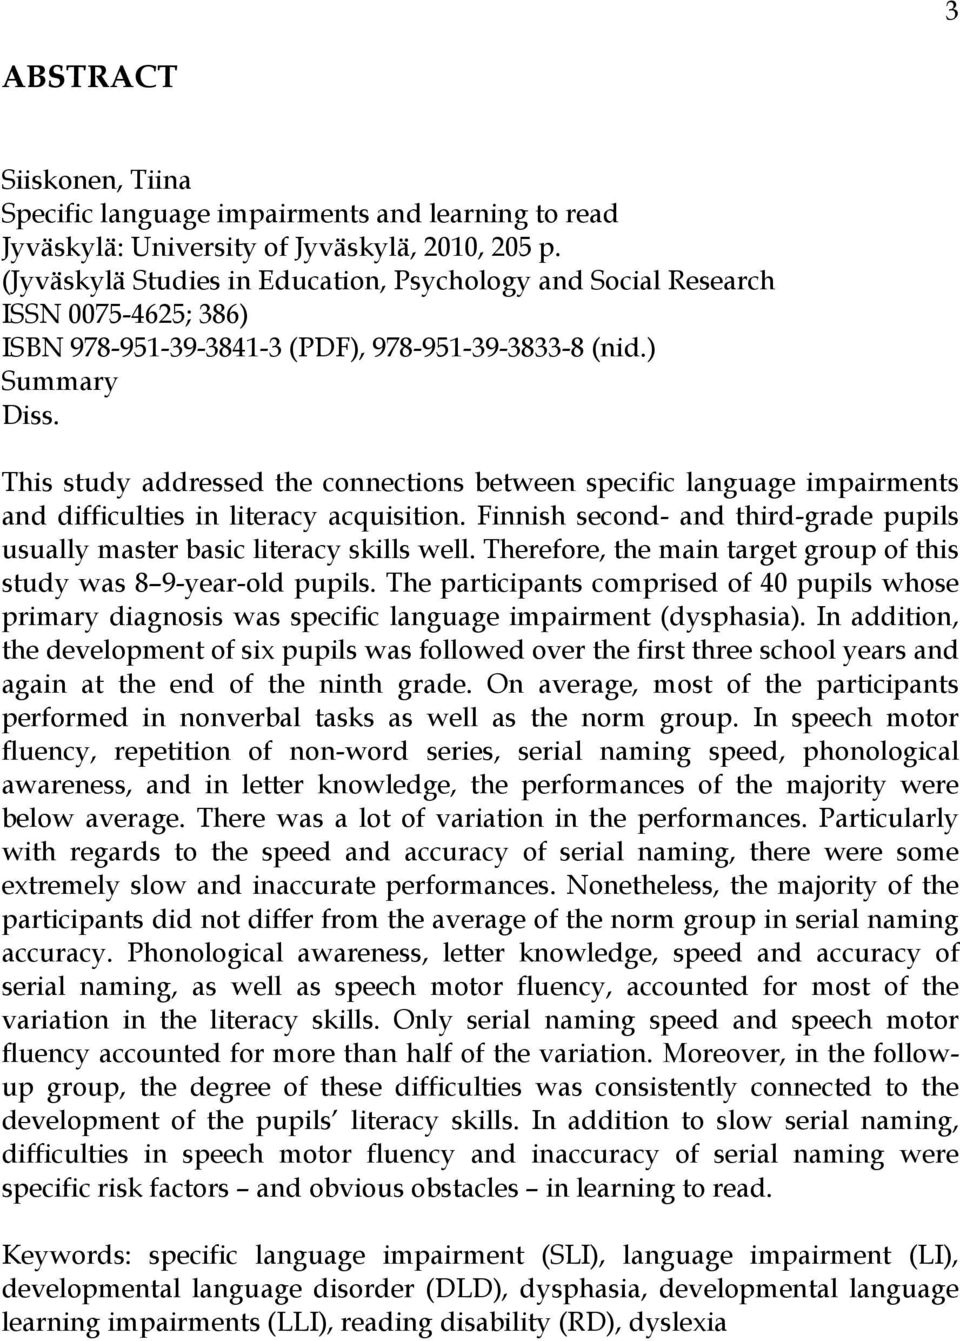 This study addressed the connections between specific language impairments and difficulties in literacy acquisition. Finnish second- and third-grade pupils usually master basic literacy skills well.